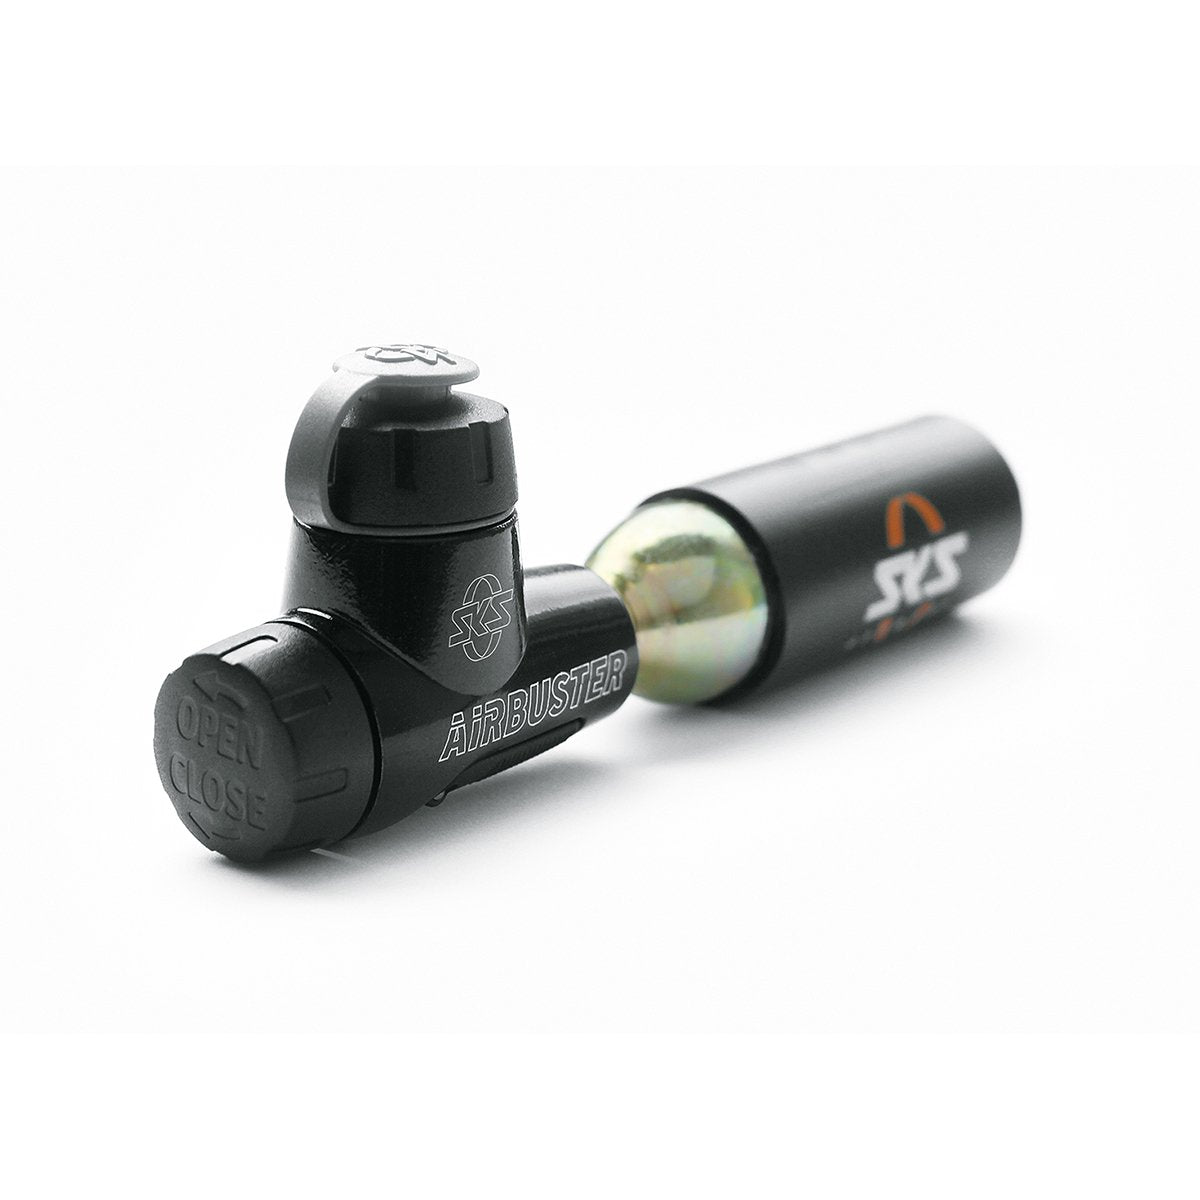 SKS - Bicycle CO2 Inflator - Airbuster